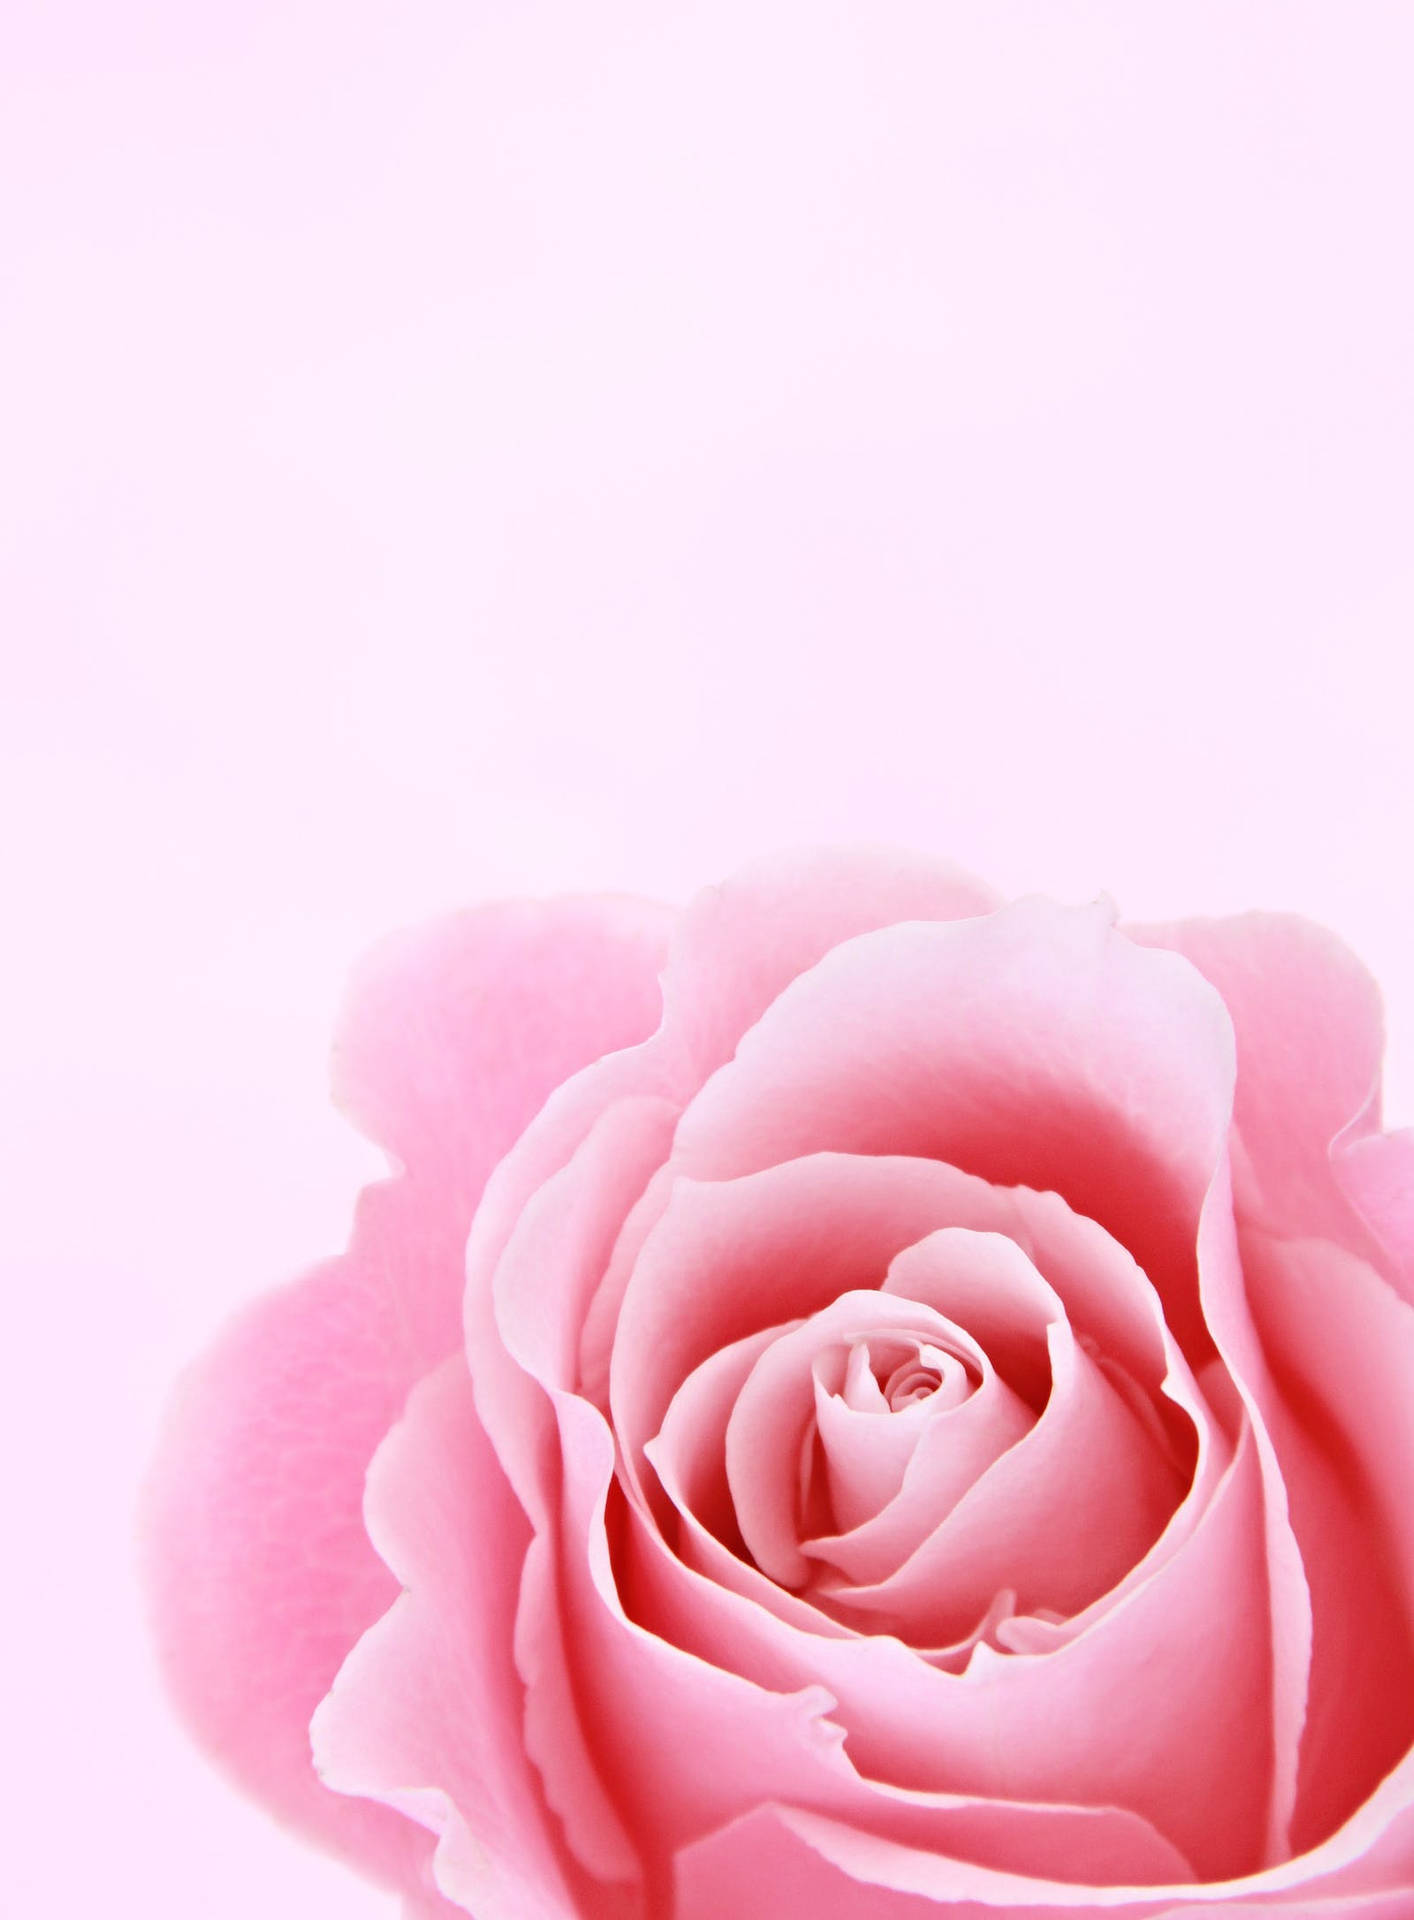 Iphone Wallpaper Pink  Free Aesthetic HD & 4K Mobile Phone Images